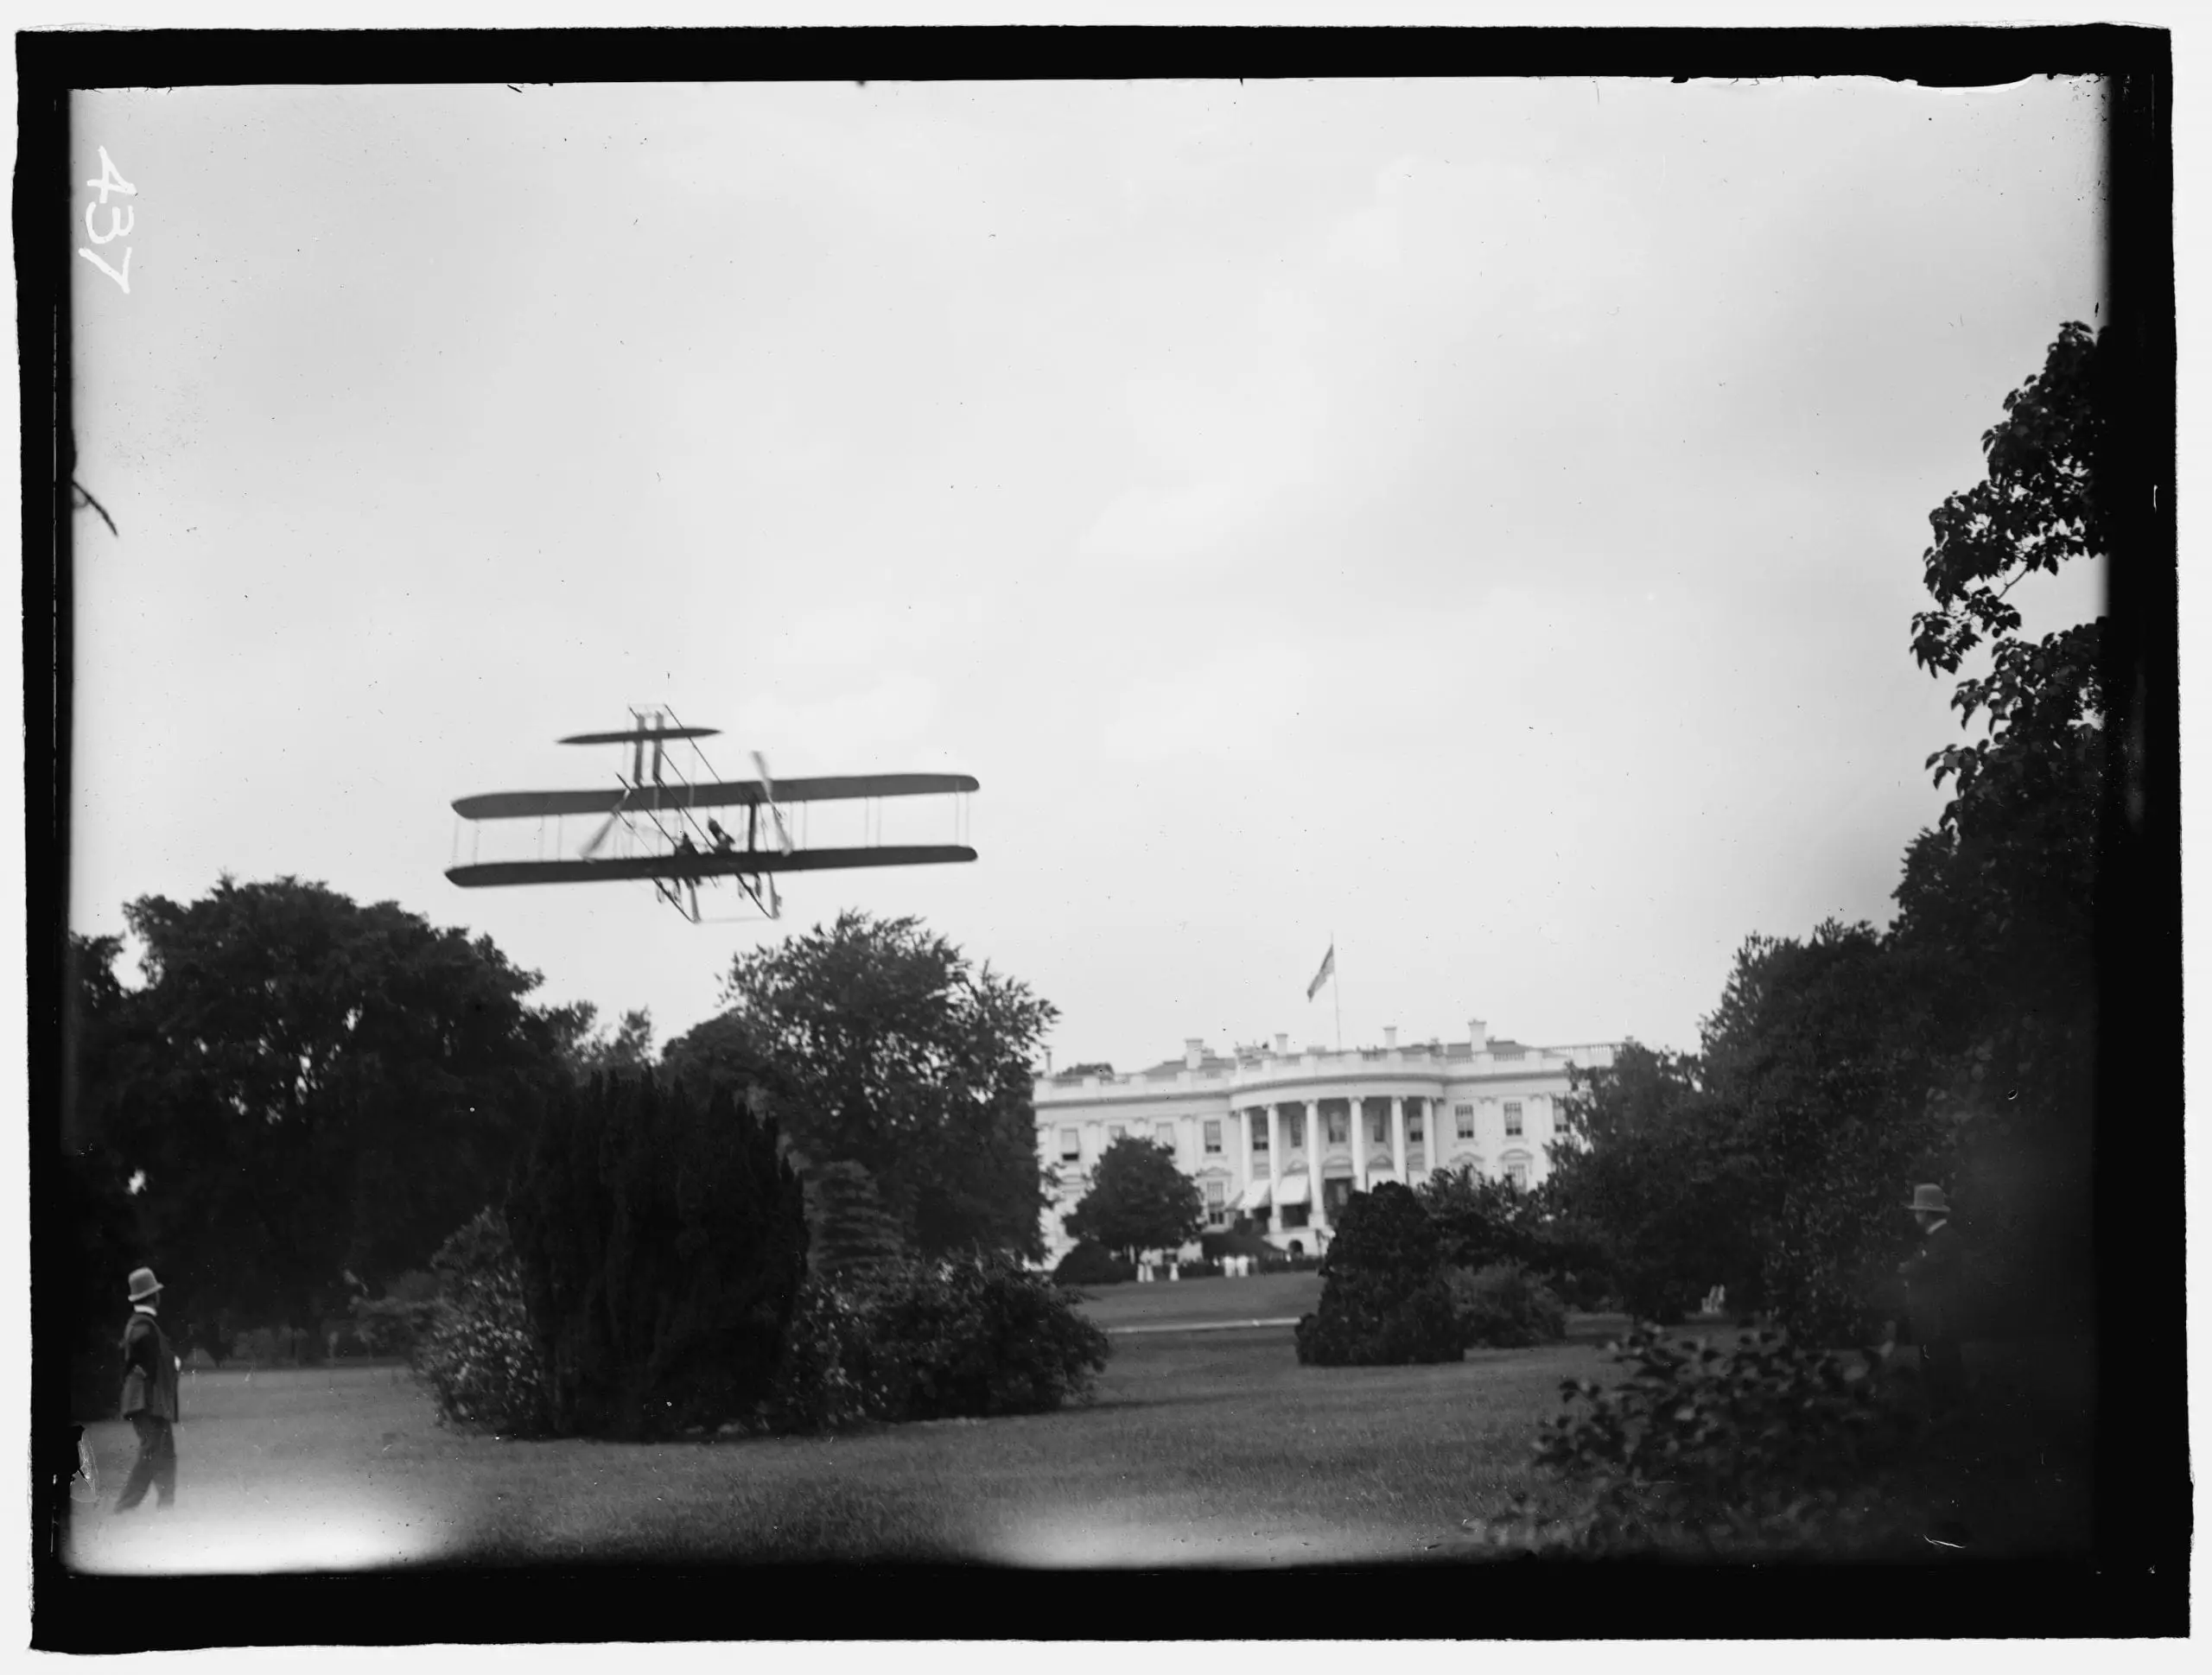 Harry Atwood takes off from the South Lawn - July 14th, 1911